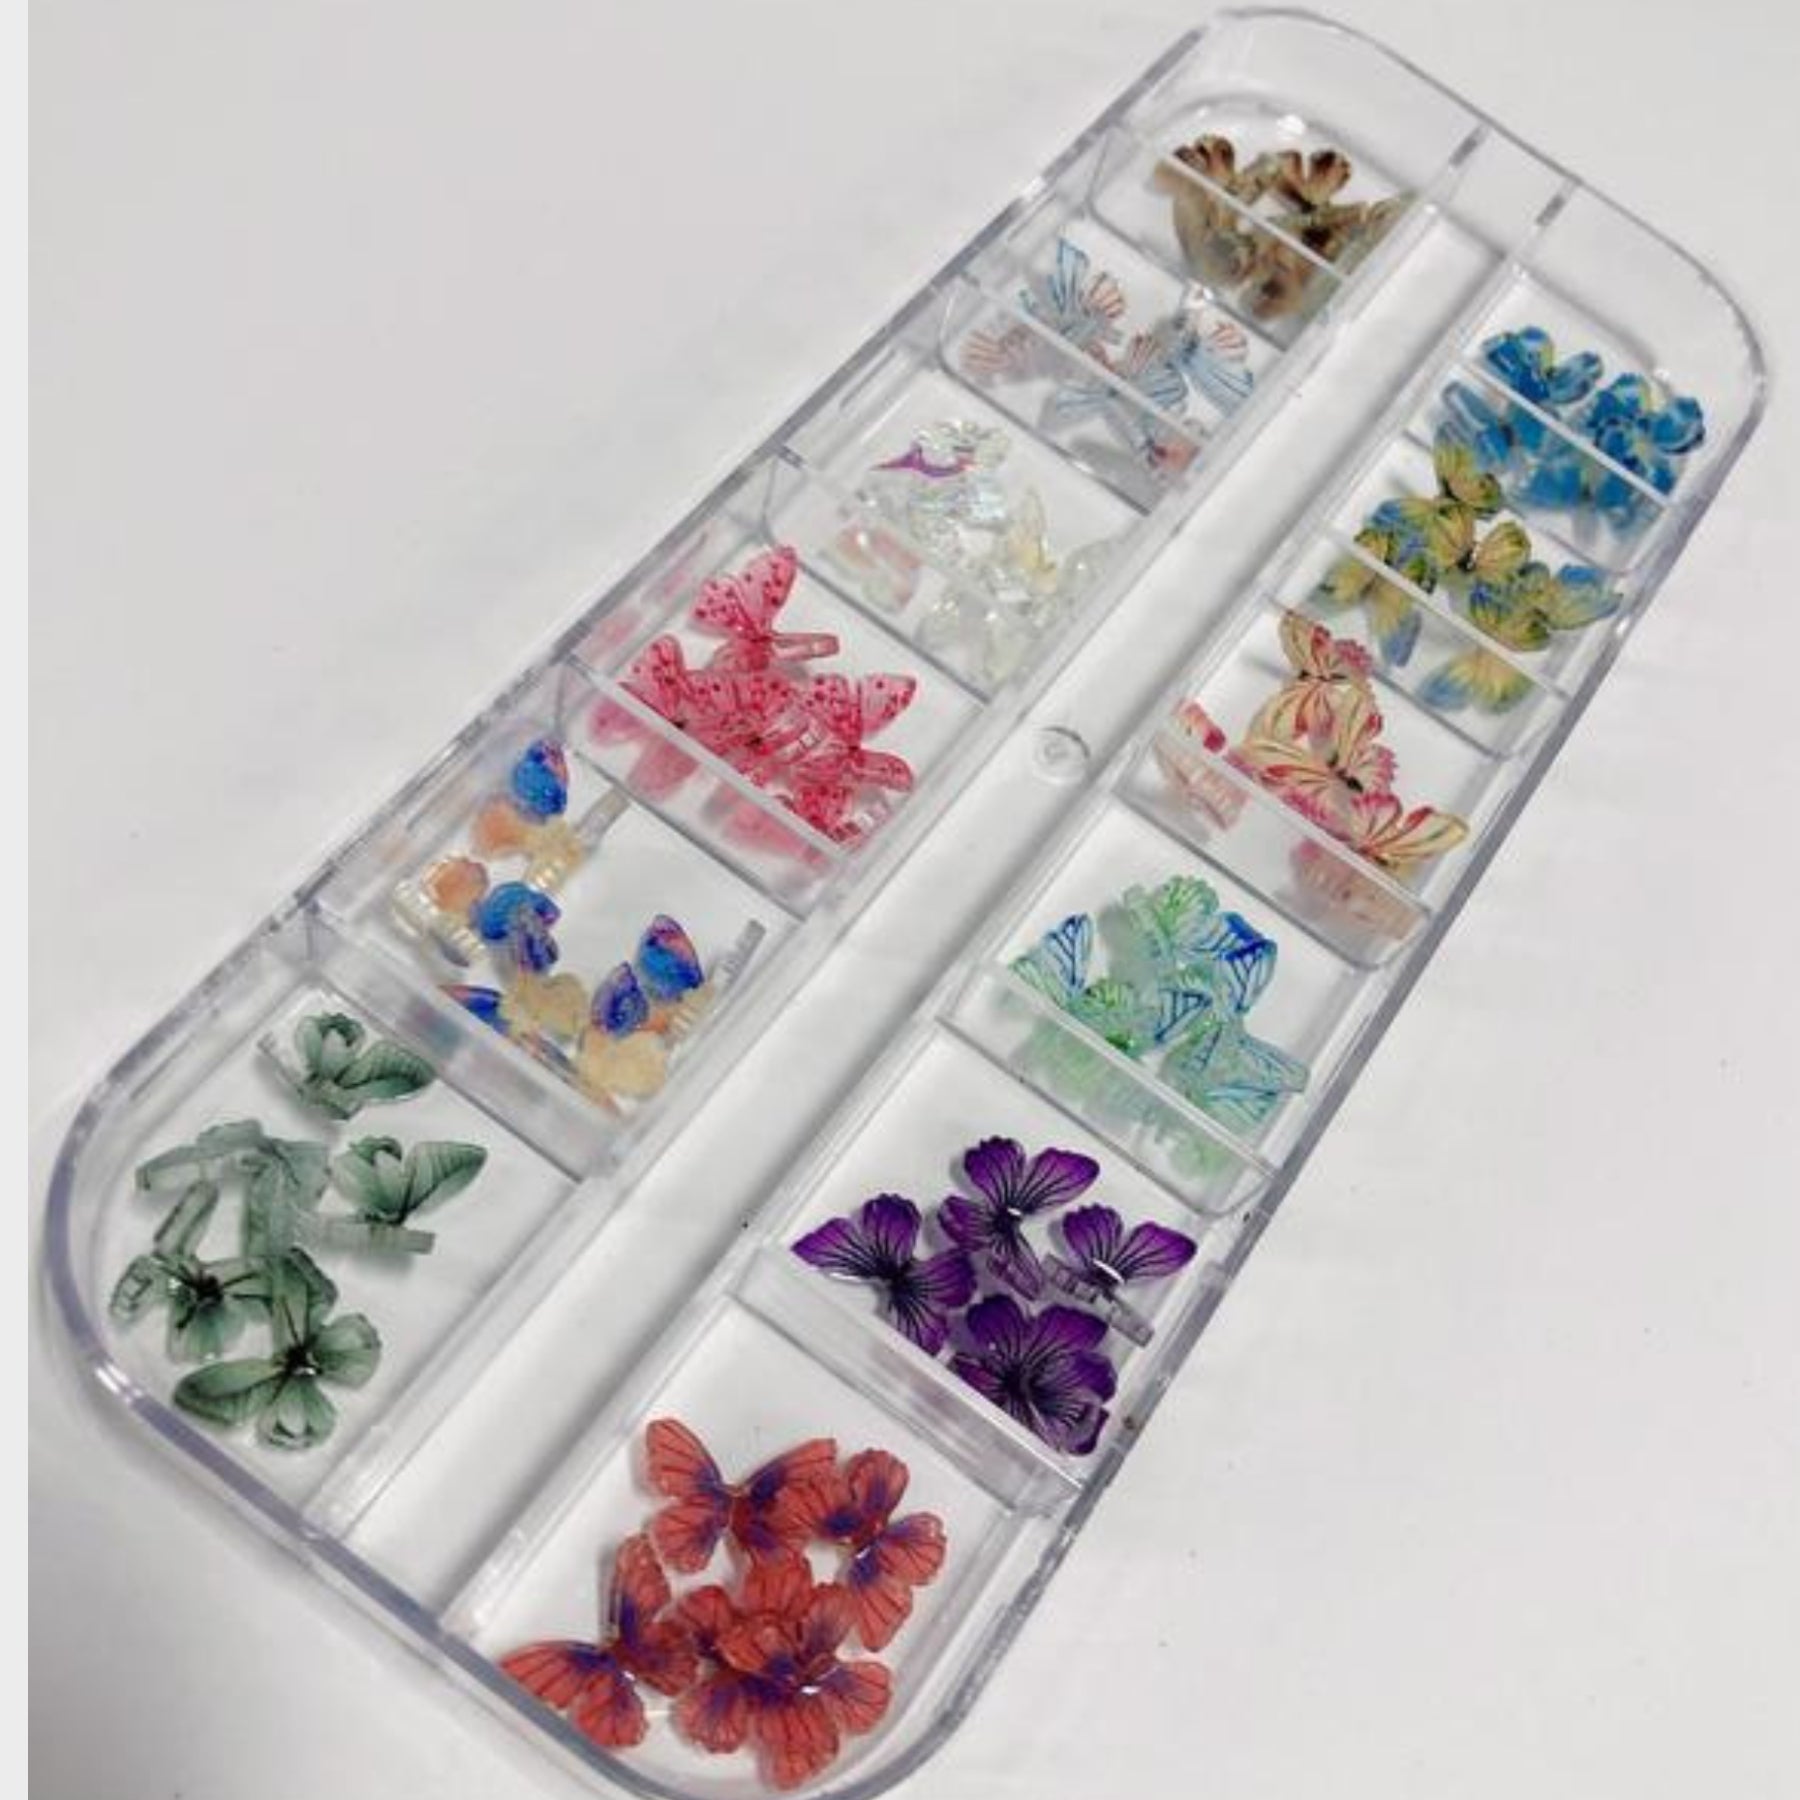 Set 12 colors 3D Butterfly Nail Charm - Fancy Nail Designs, Butterflies nail charms, nail arts with fancy charms, Metal charms nail decorations